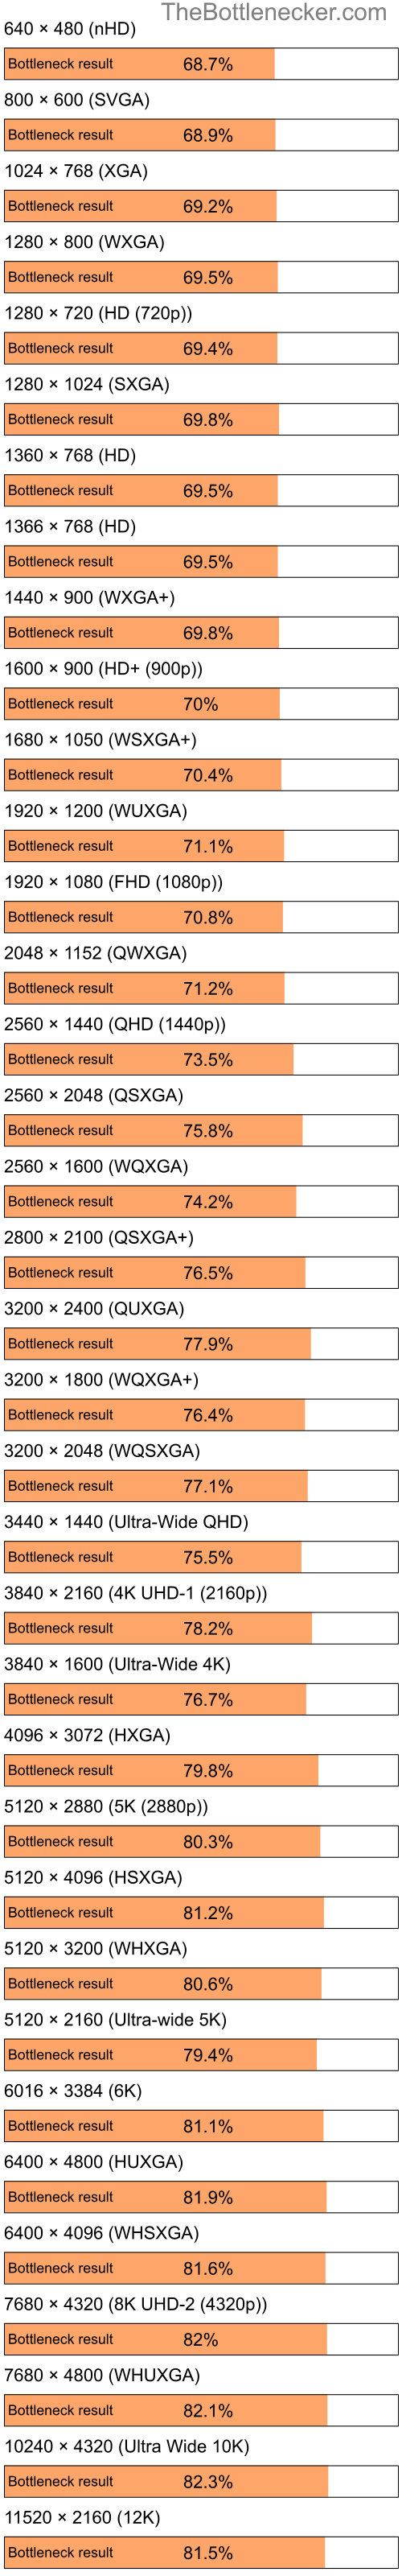 Bottleneck results by resolution for Intel Celeron M and AMD Radeon HD 6290 in Graphic Card Intense Tasks